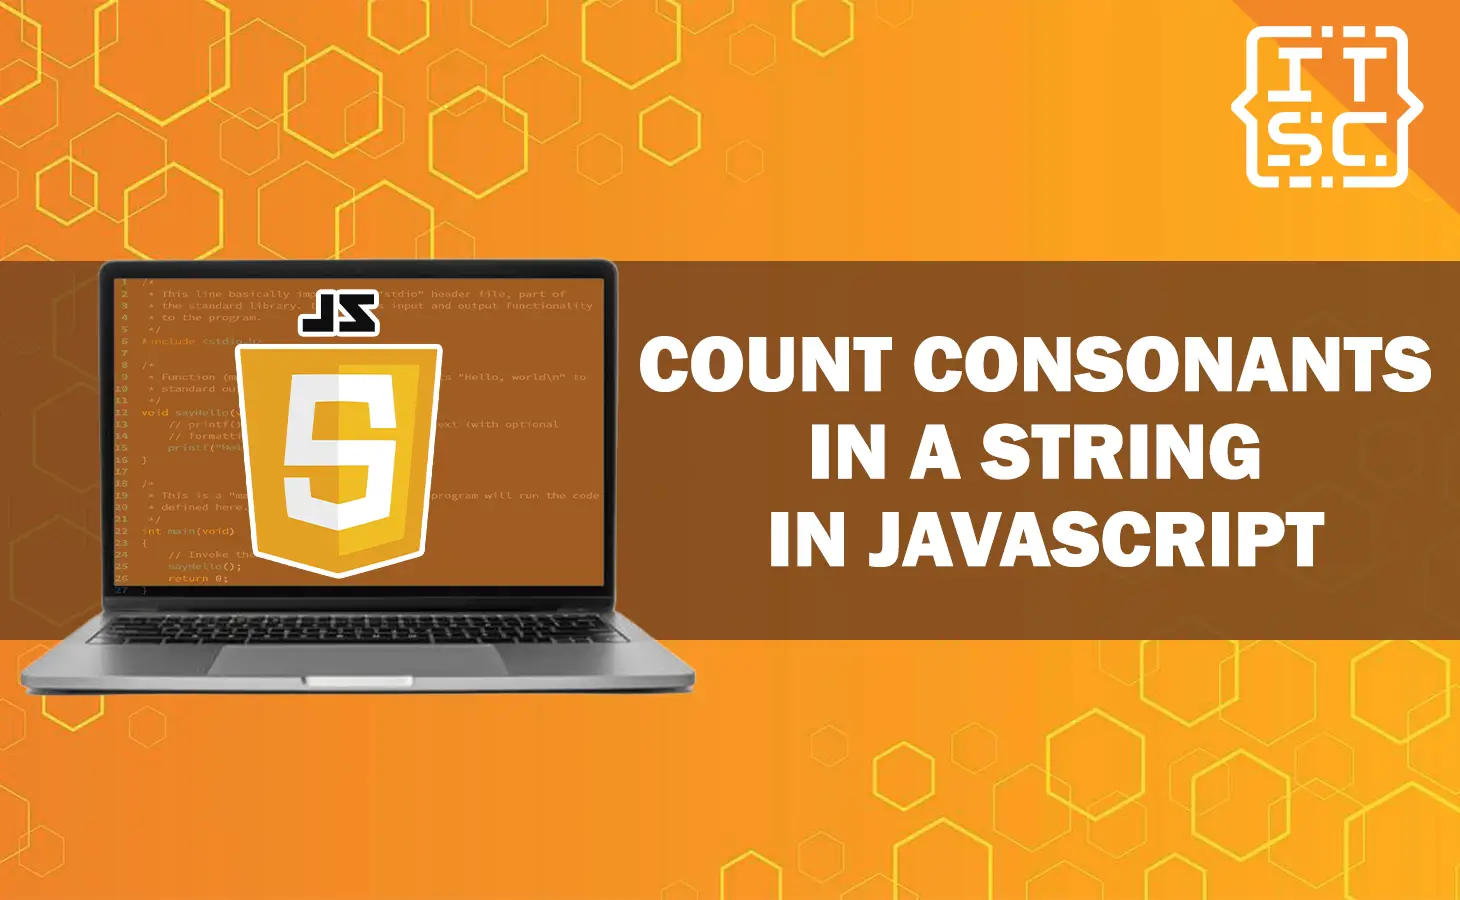 How to count consonants in a string in JavaScript?